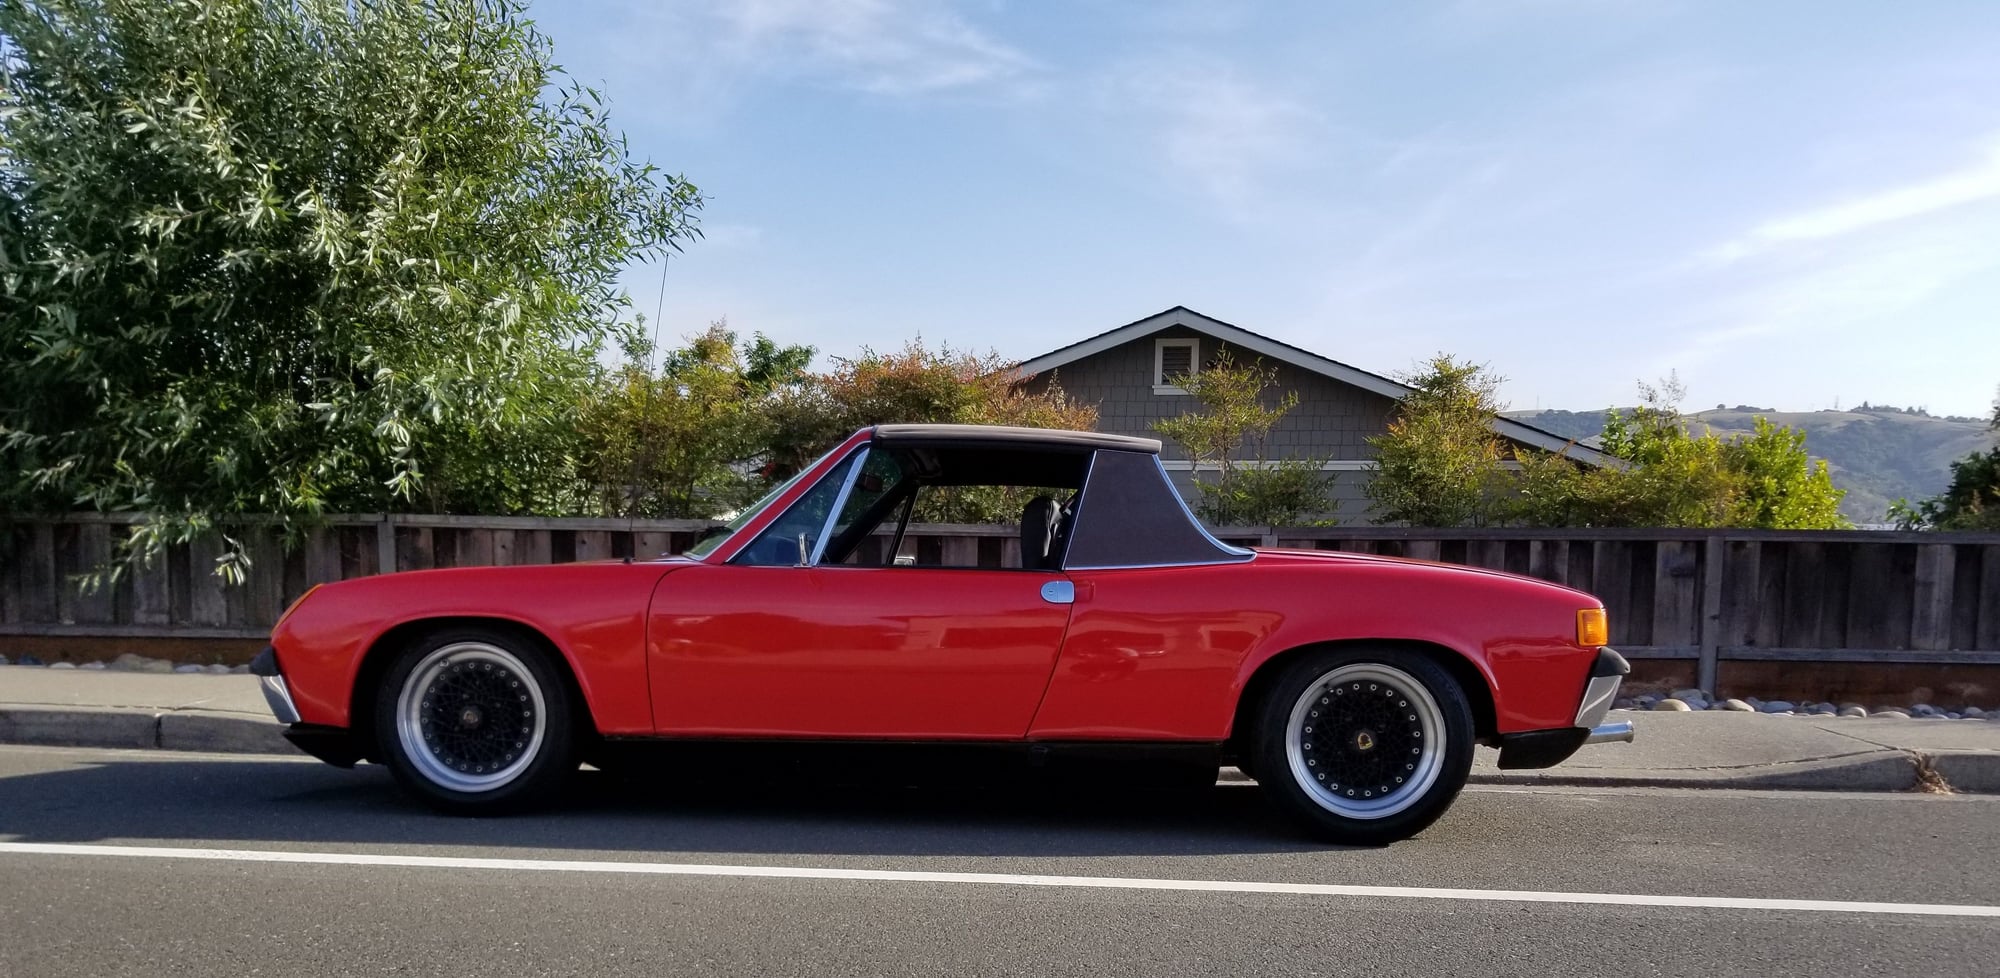 1972 Porsche 914 - 1972 914/4 Restored For Sale - Used - VIN 4712912707 - 75,000 Miles - 4 cyl - 2WD - Manual - Coupe - Red - Sf Bay Area, CA 94510, United States